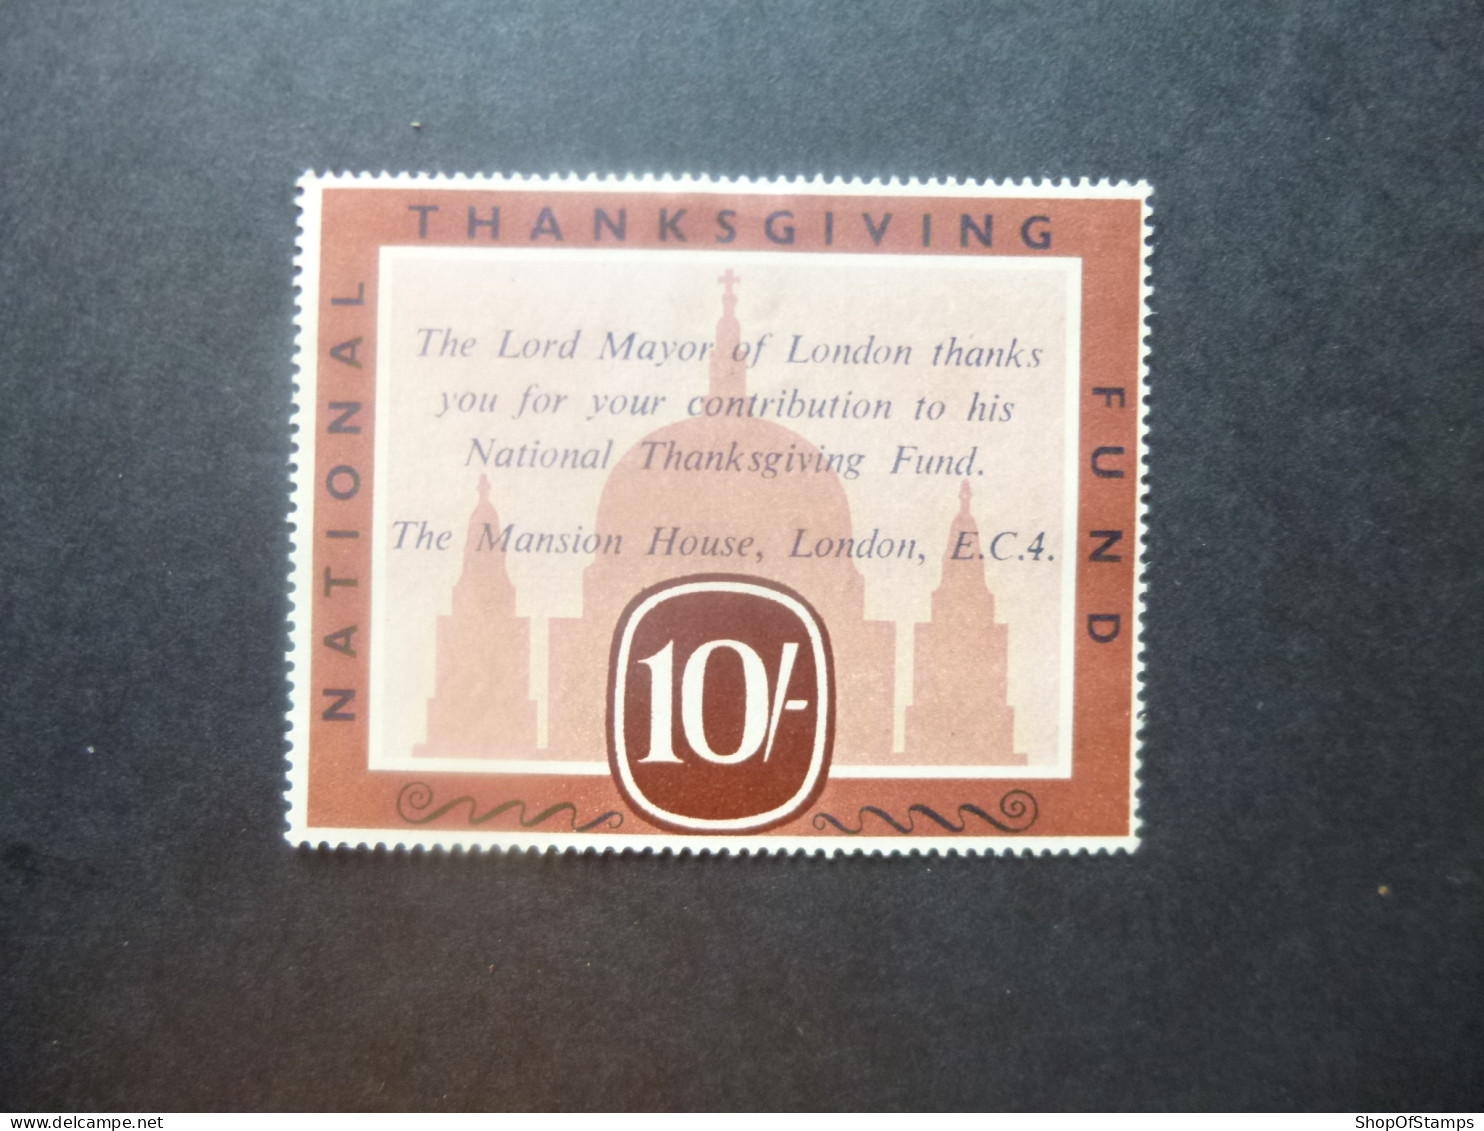 GREAT BRITAIN LABEL NATIONAL THANKS GIVING FUND OF LORD MAYOR LONDON 10sh SG NATIONAL THANKS GIVING FUND LABEL 10s - Cinderellas